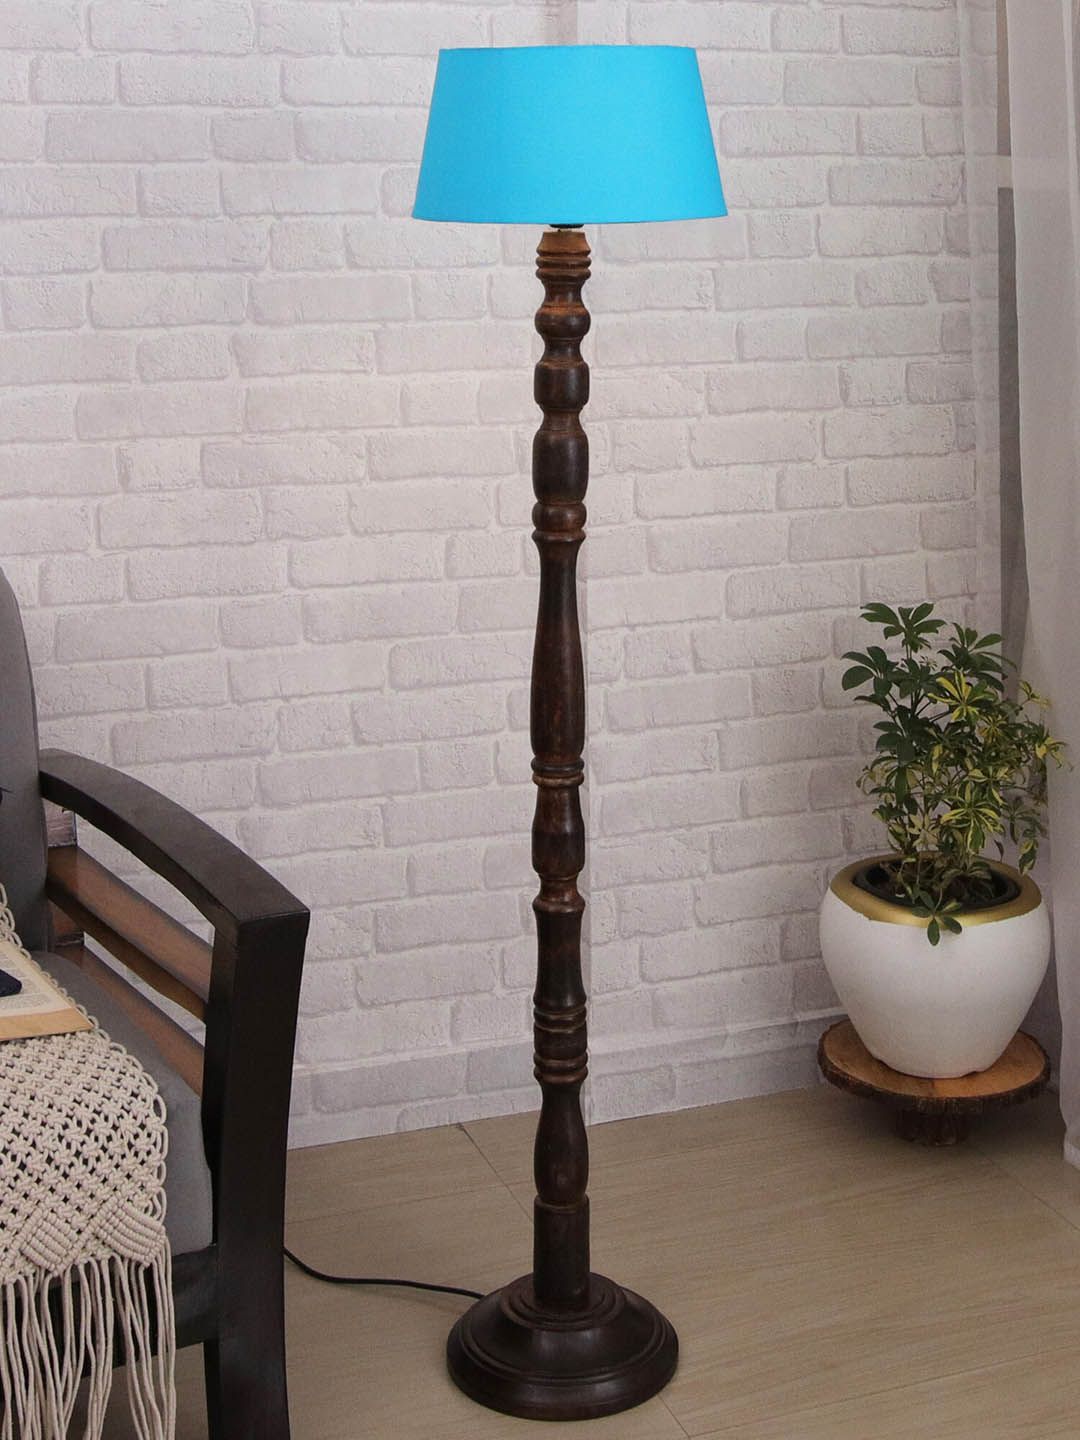 Homesake Black Finish Wooden Floor Lamp With Shade Price in India